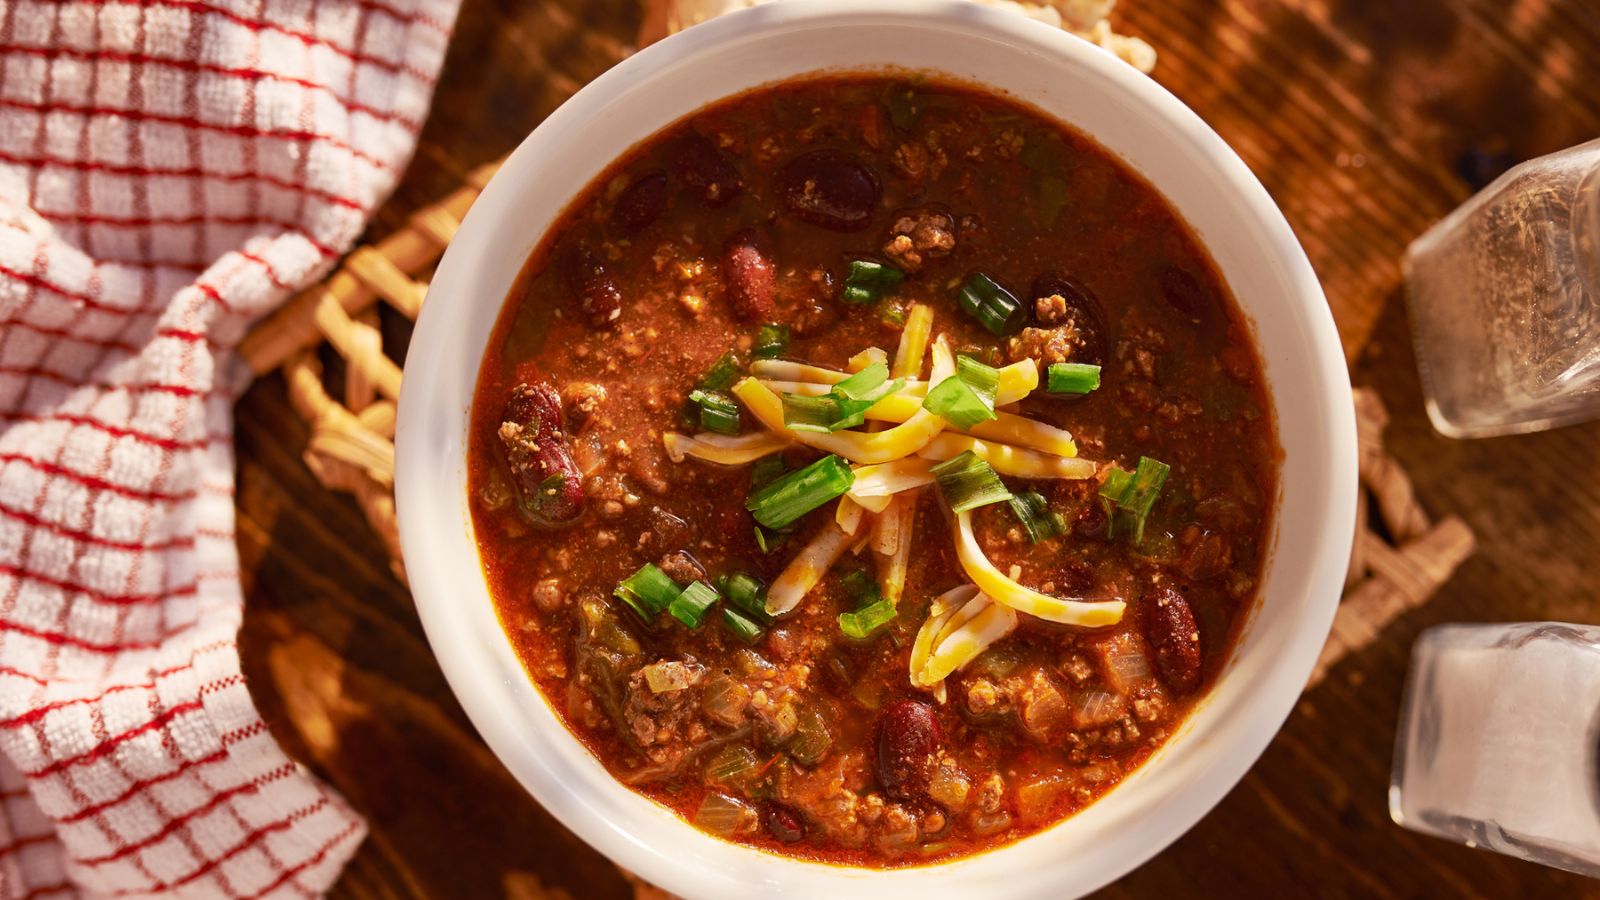 Cook Up a Storm Today with These 20 Chili Recipes